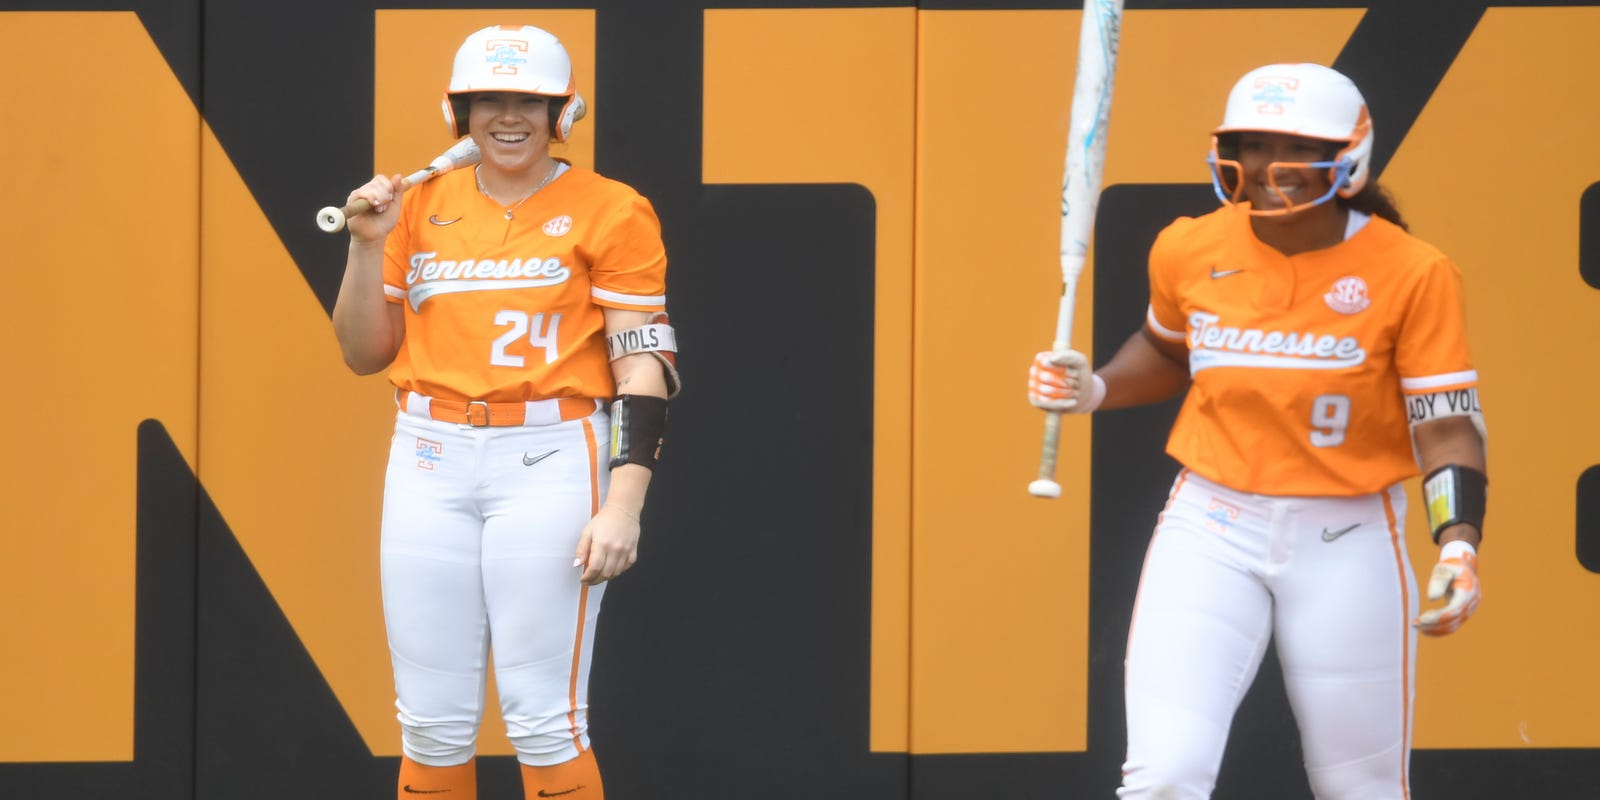 SEC softball power rankings: Race for SEC title between Tennessee, Texas A&M going down to the wire